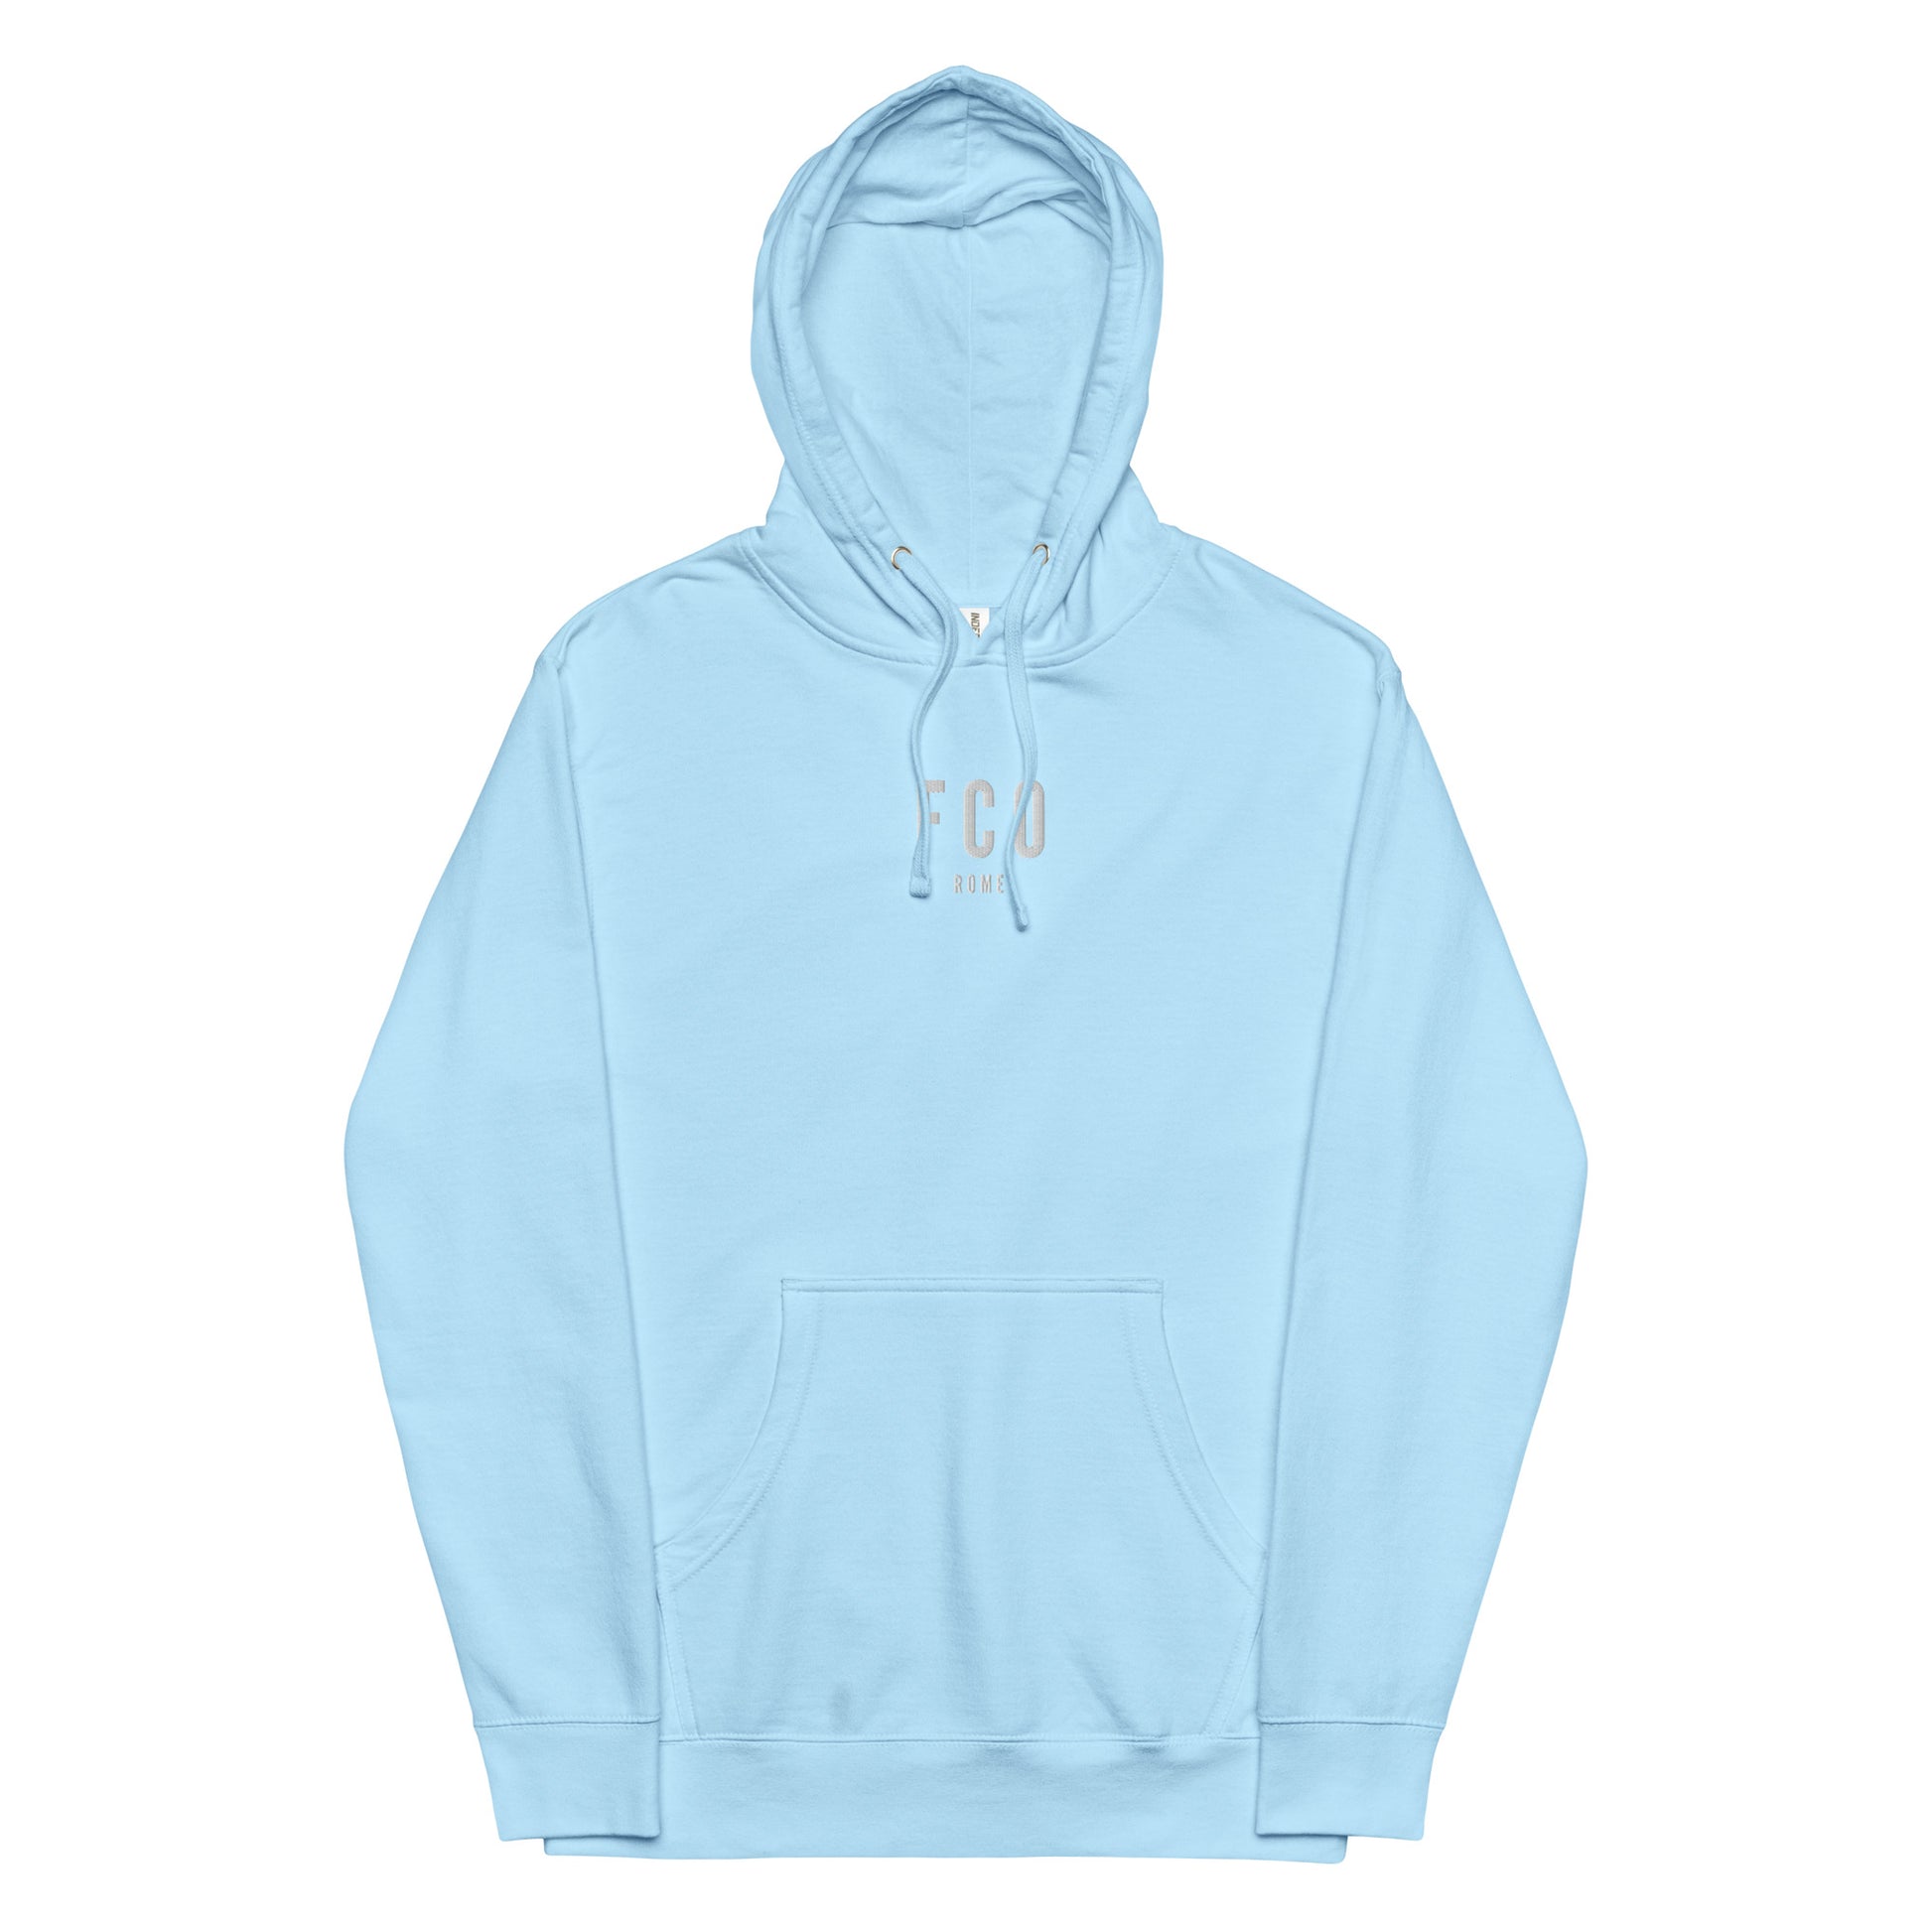 City Midweight Hoodie - White • FCO Rome • YHM Designs - Image 14